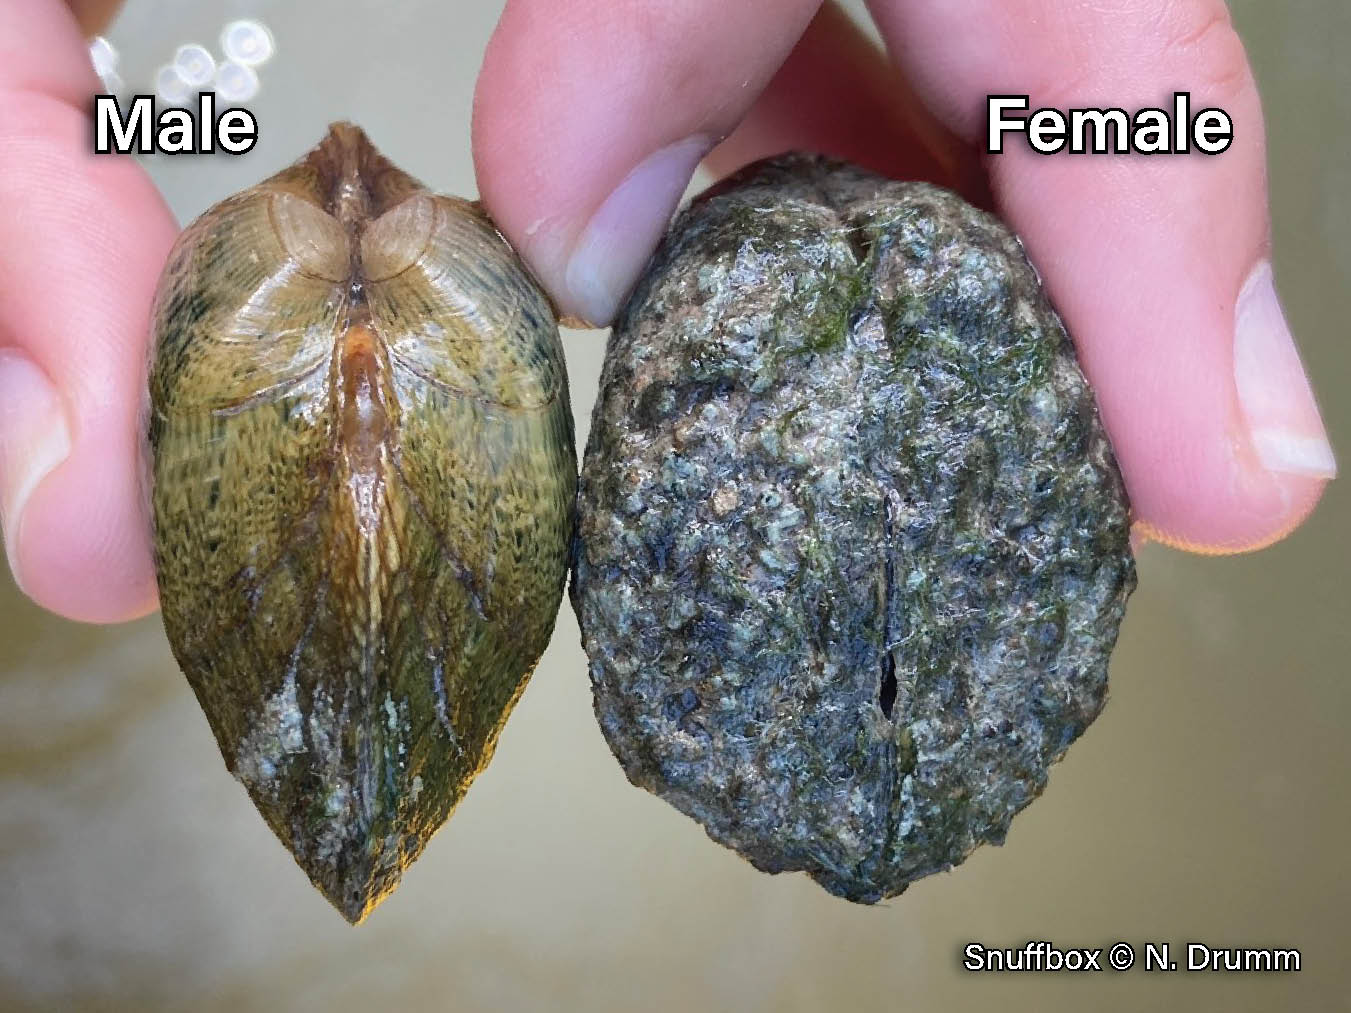 Picture of a male (left) and female (right) Snuffbox mussel, a small, triangular mussel with an inflated shell that has a posterior ridge and is yellowish-brown with green rays that look like dripping paint. The female is more inflated than the male.